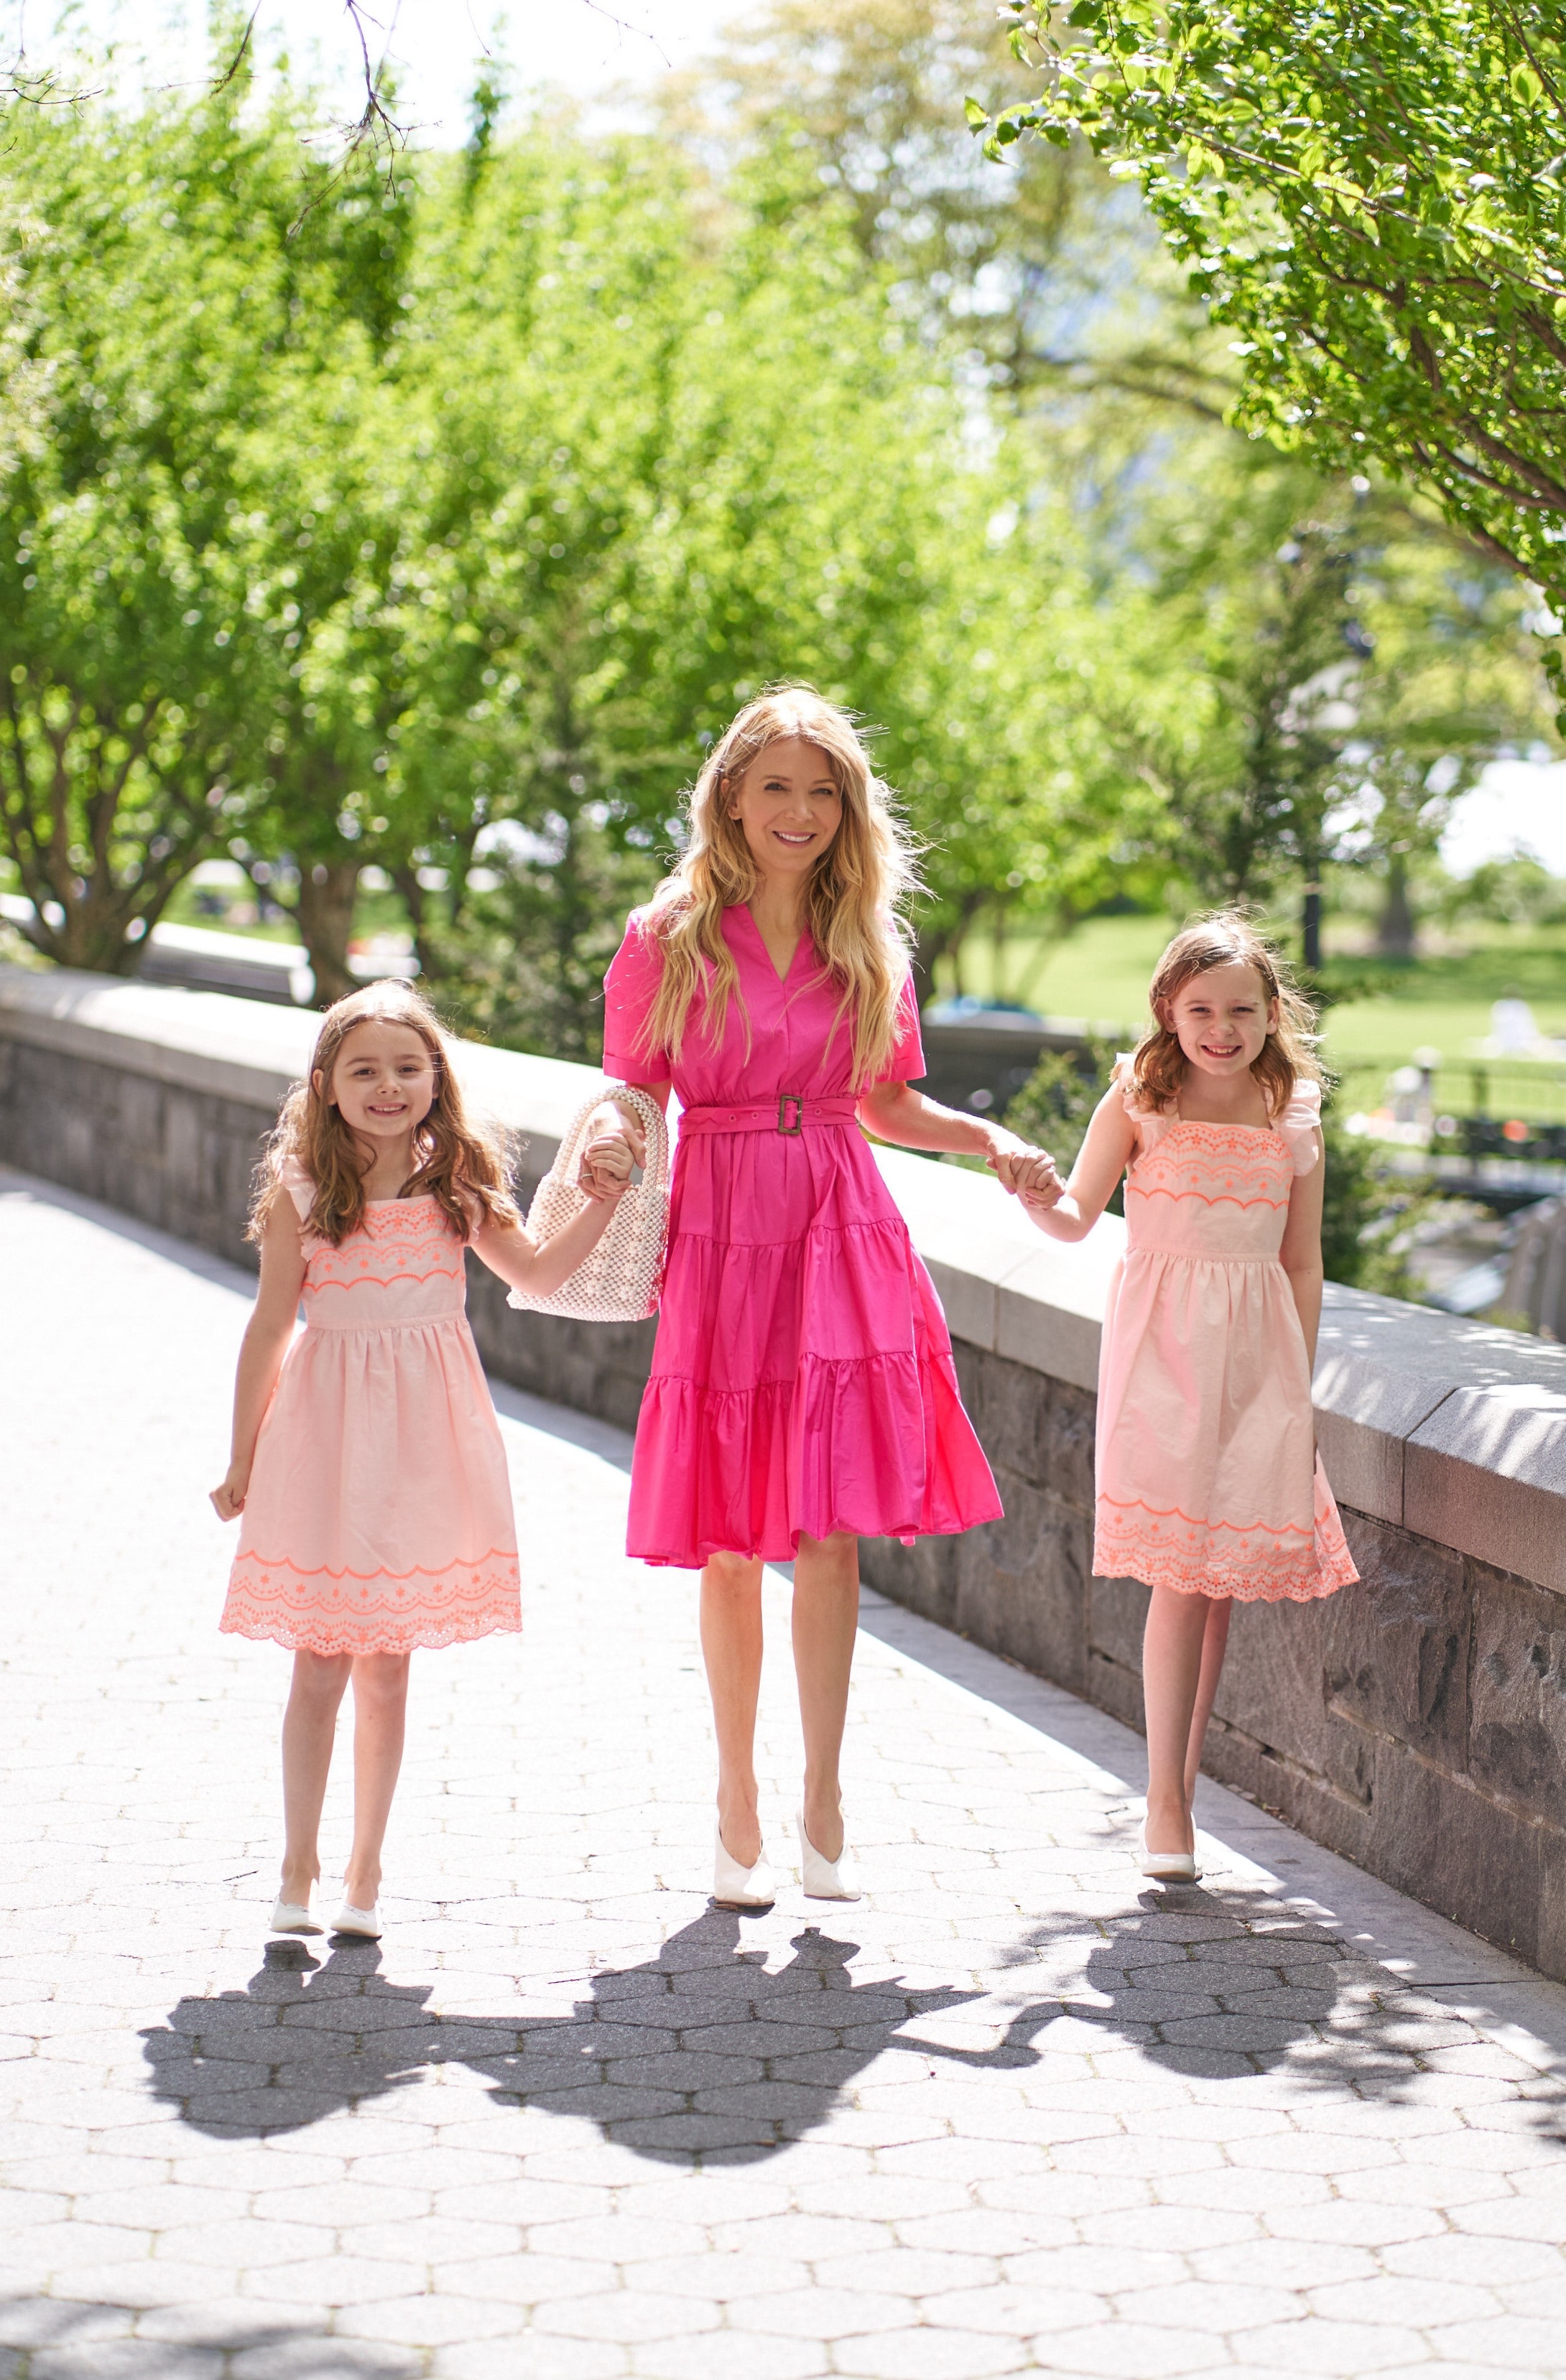 Targetstyle, Target pink dresses, girls dresses, mommy and me fashion, www.abouttheoutfits.com